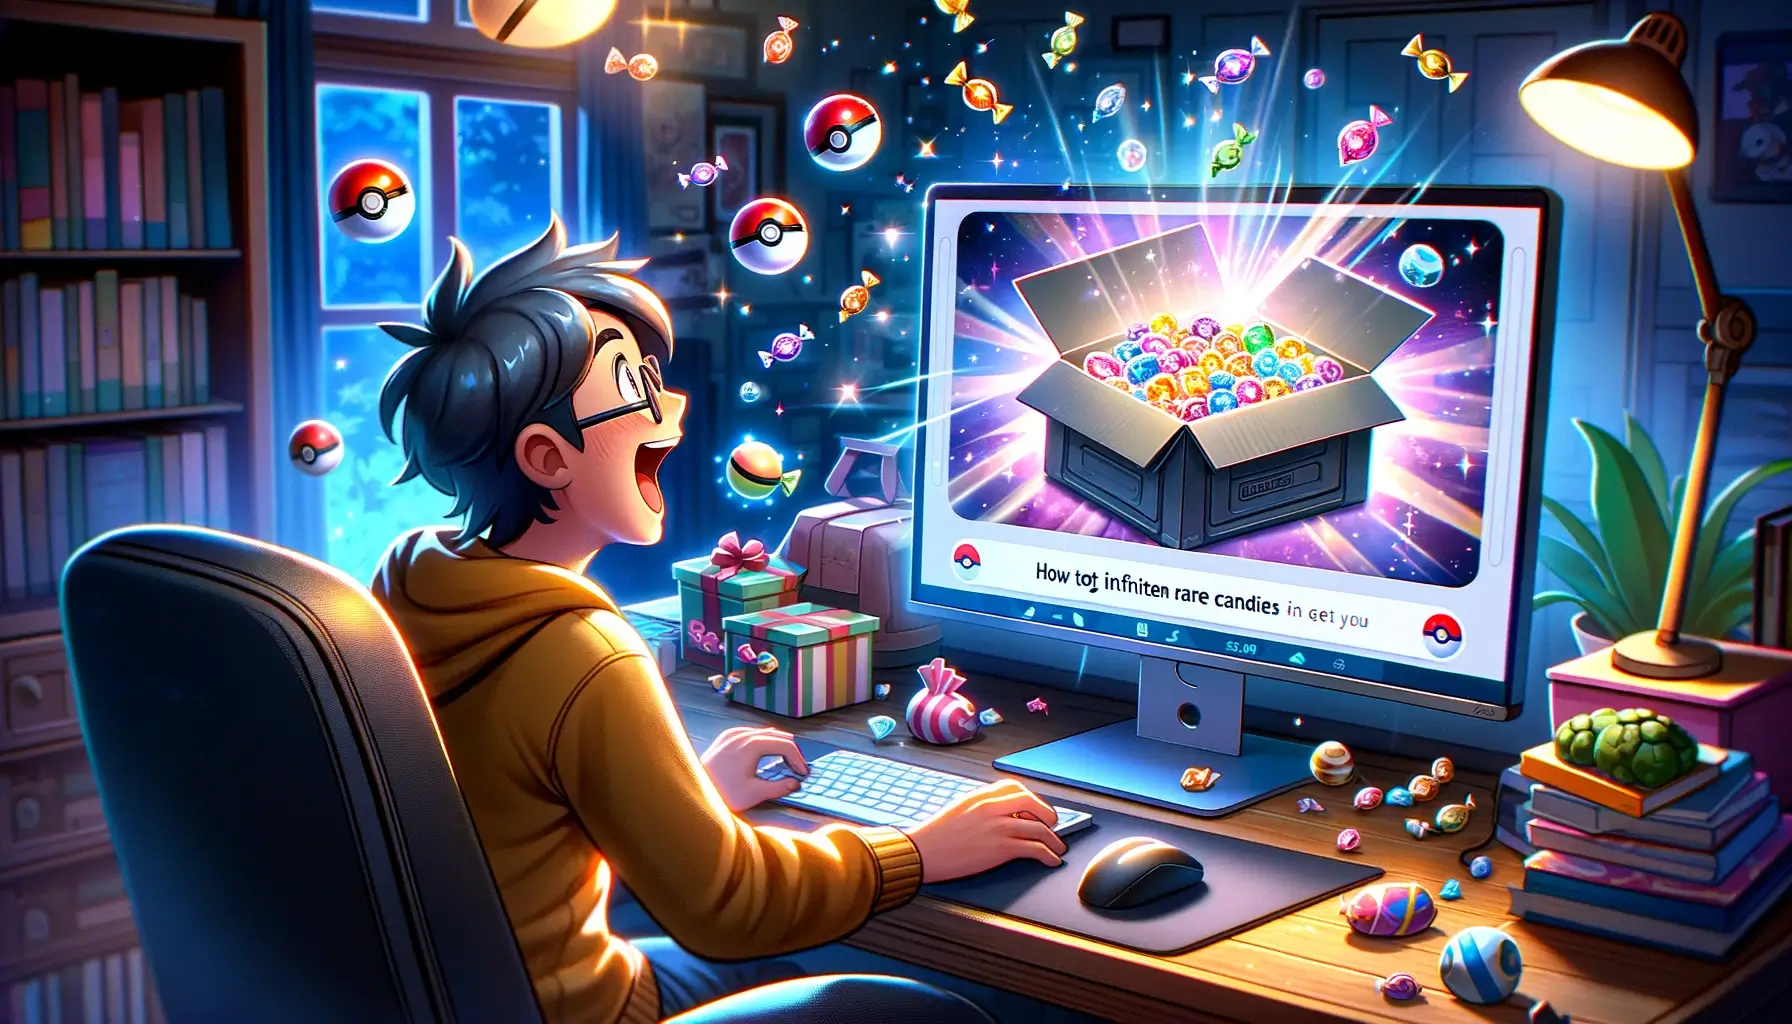 How to Get Infinite Rare Candies in Pokemon Infinite Fusion'. The image depicts a player discovering